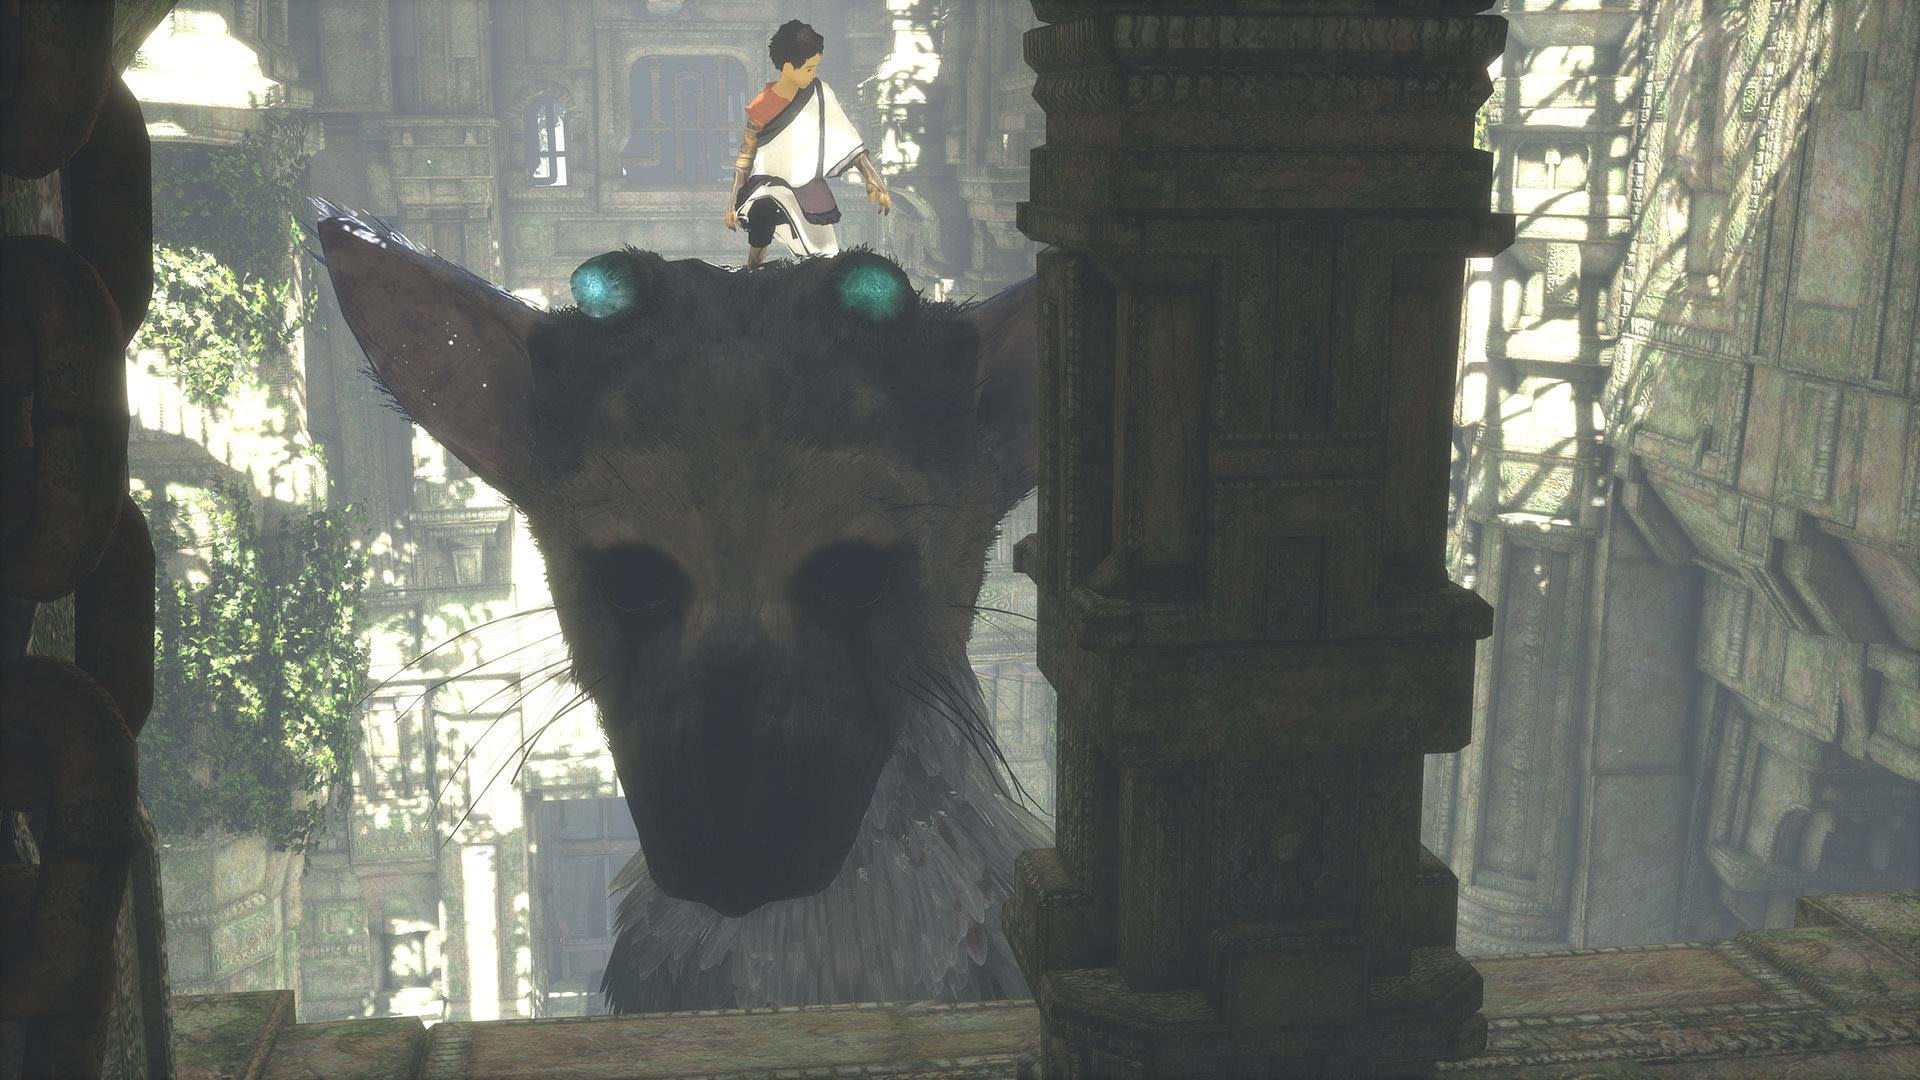 The Last Guardian gameplay: Everything we know so far!